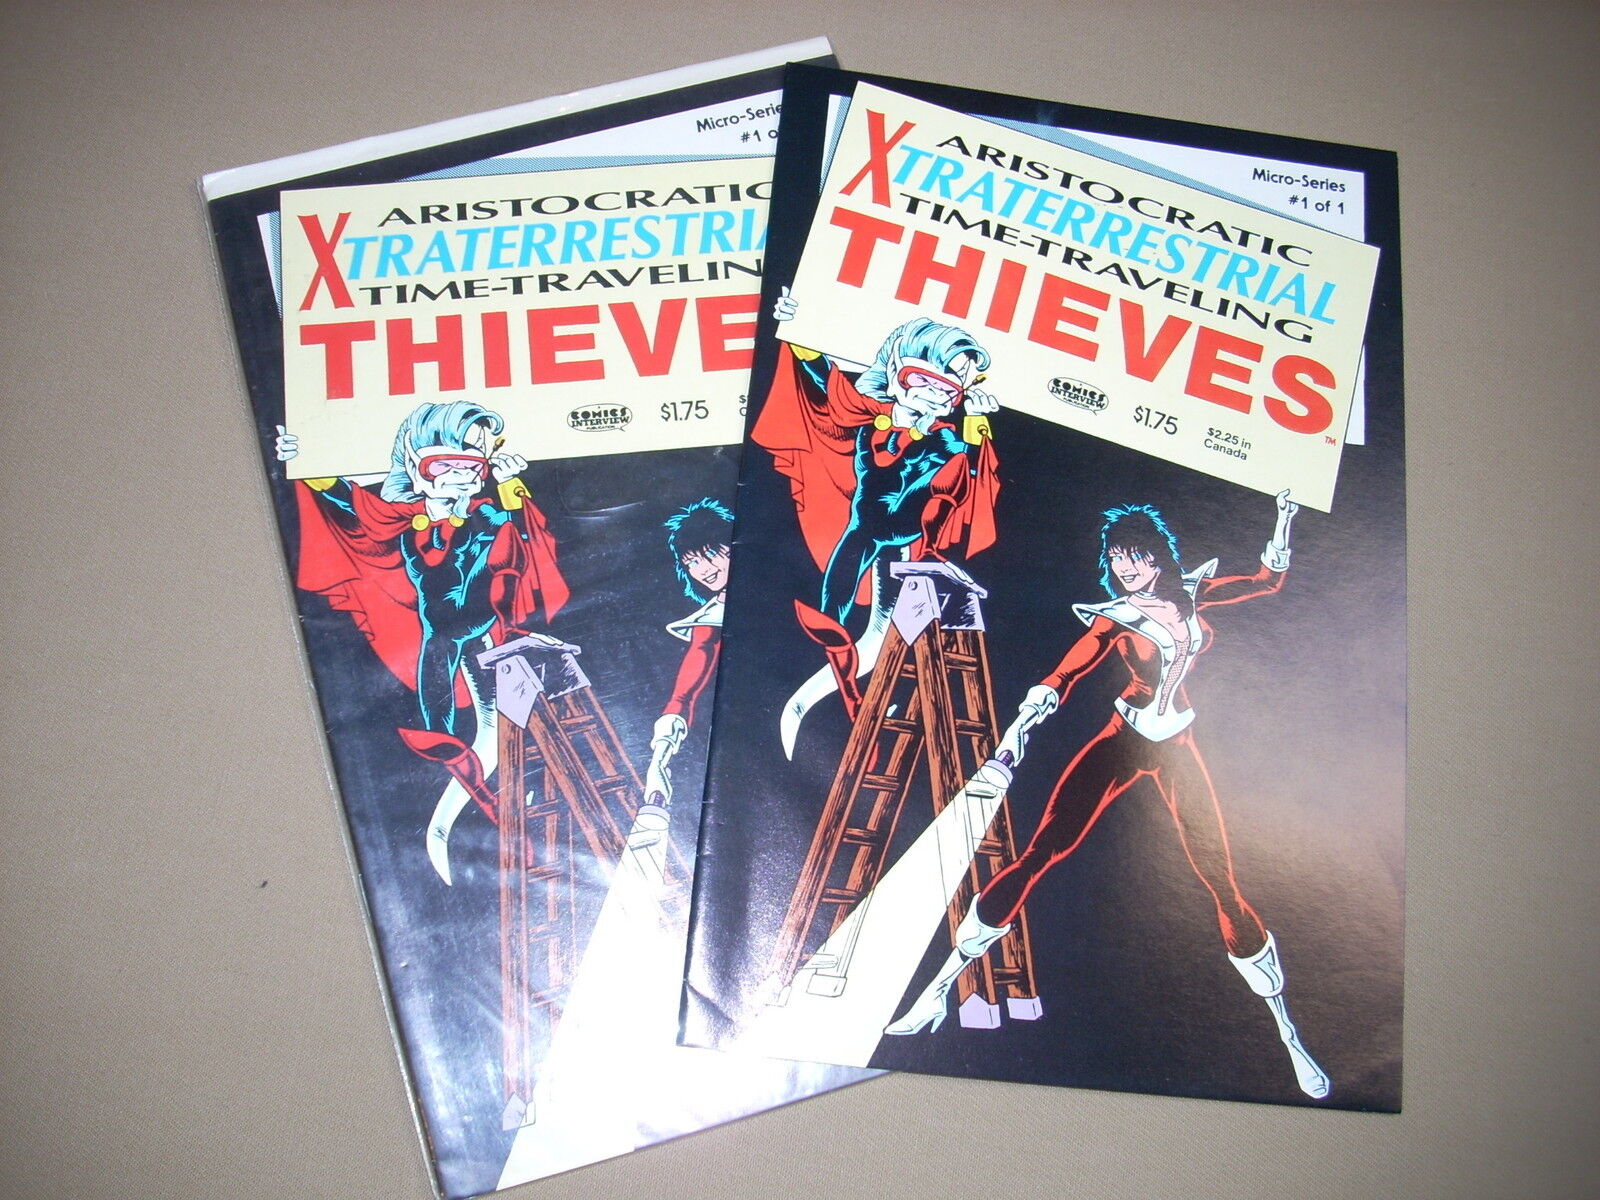 Aristrocratic Xtraterrestrial Time-Traveling Thieves #1 (x2) VF NM- 8.5 9.0 9.2